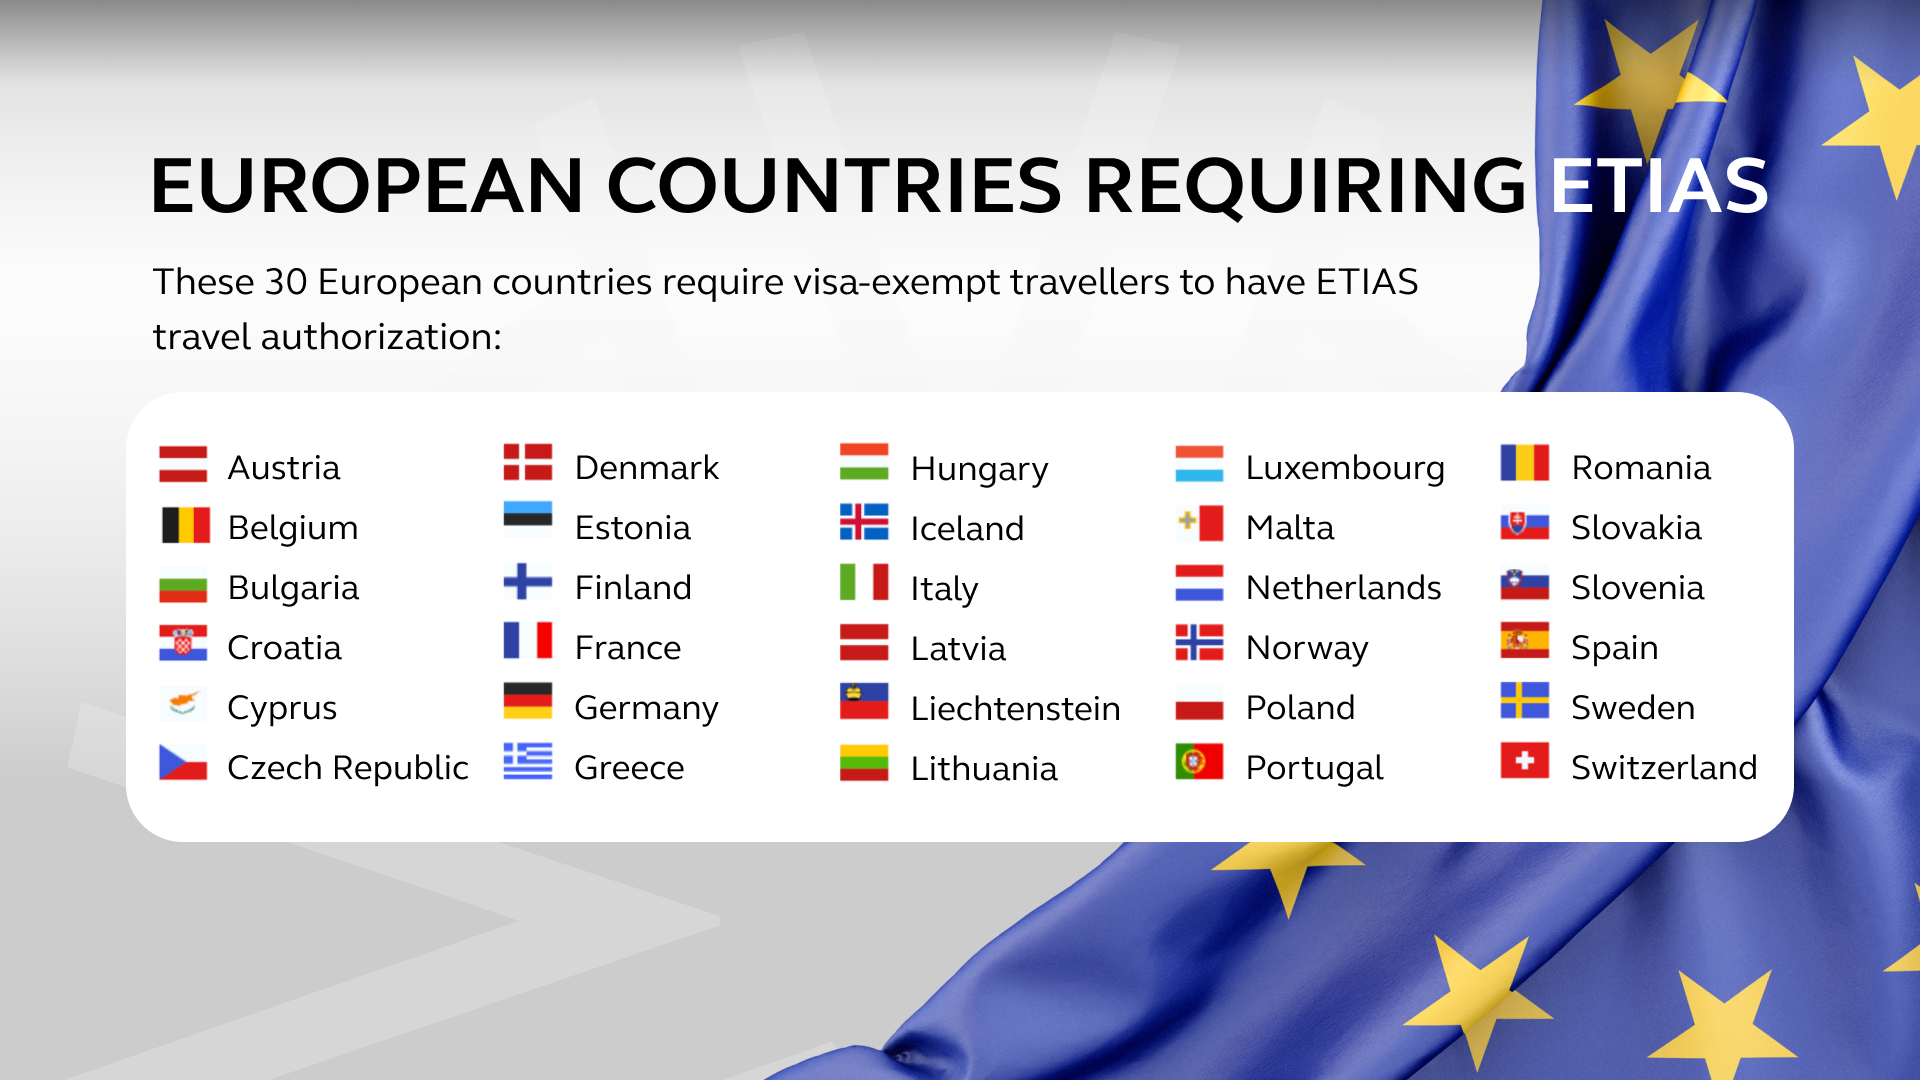 A list of European countries that will require ETIAS pre-approval